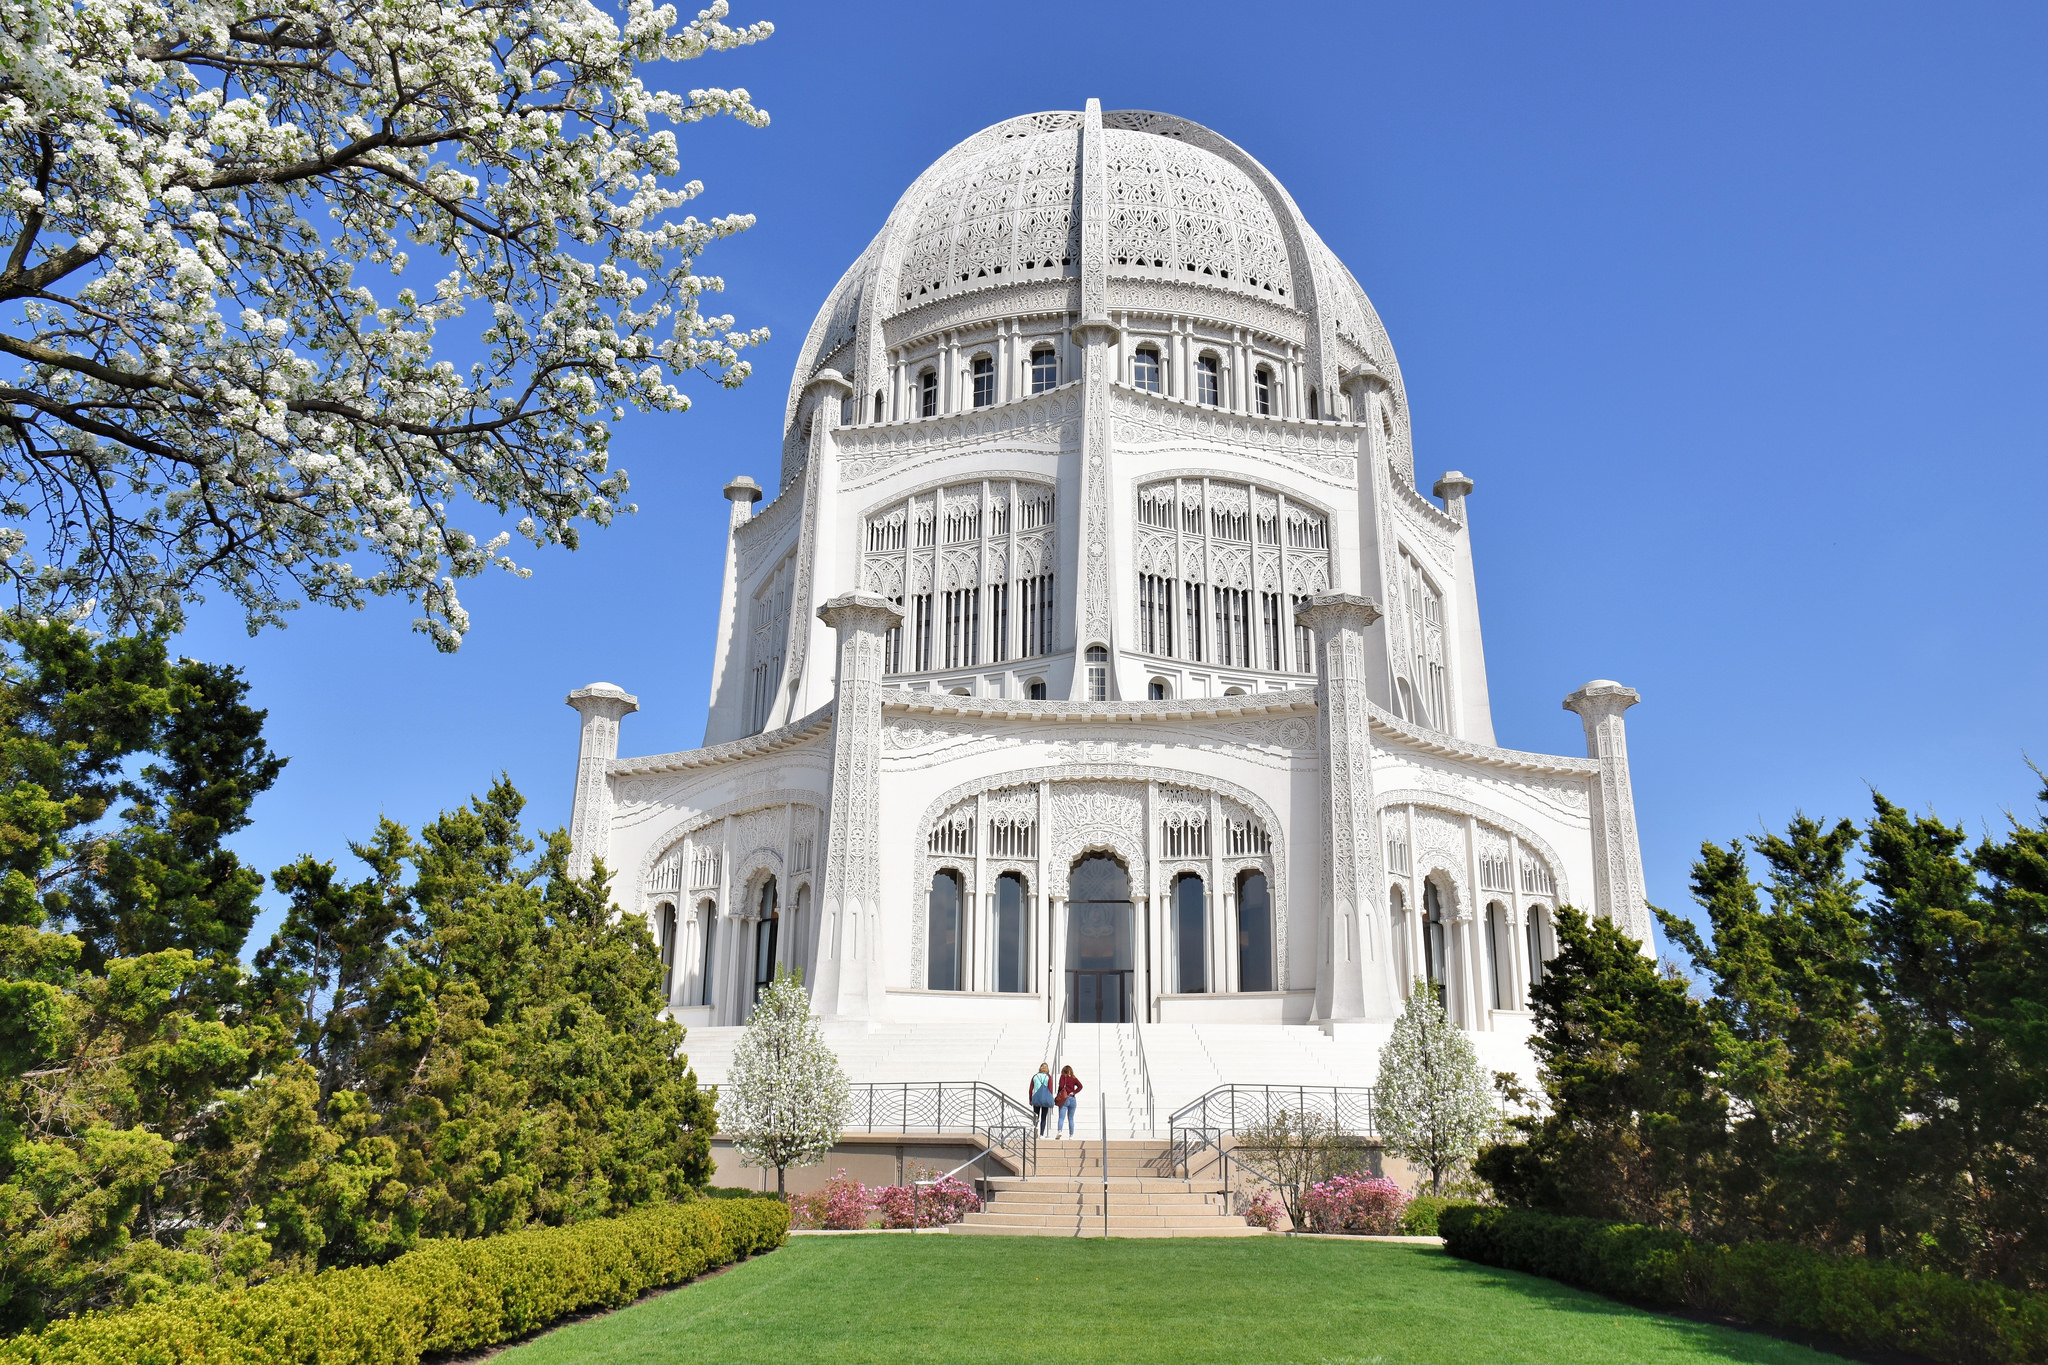 The Baha'i House of Worship located in a suburb outside Chicago is the only Baha'i temple in the United States. Wisconsinites donated to the temple's construction, which took over forty years to complete. 